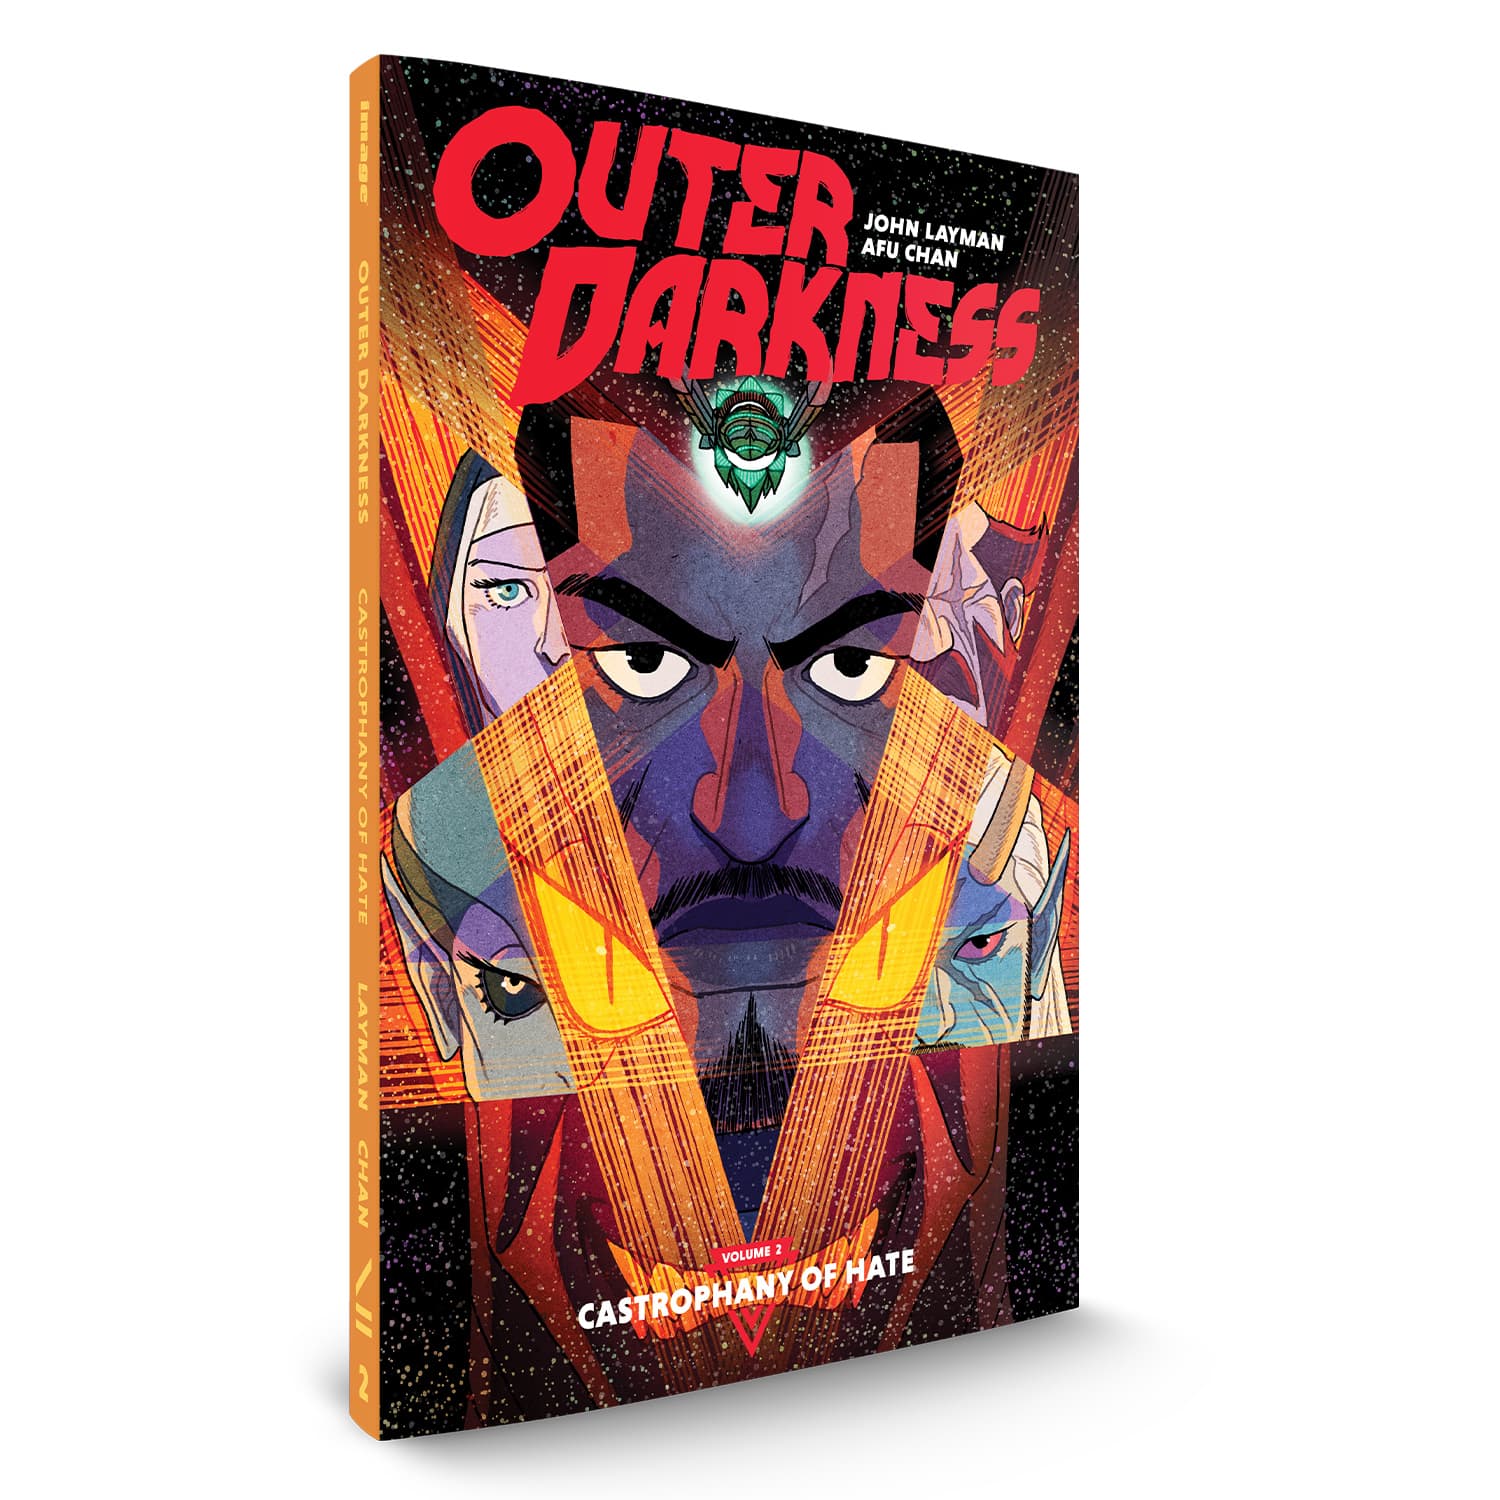 OUTER DARKNESS, VOL. 2: CASTROPHANY OF HATE TP